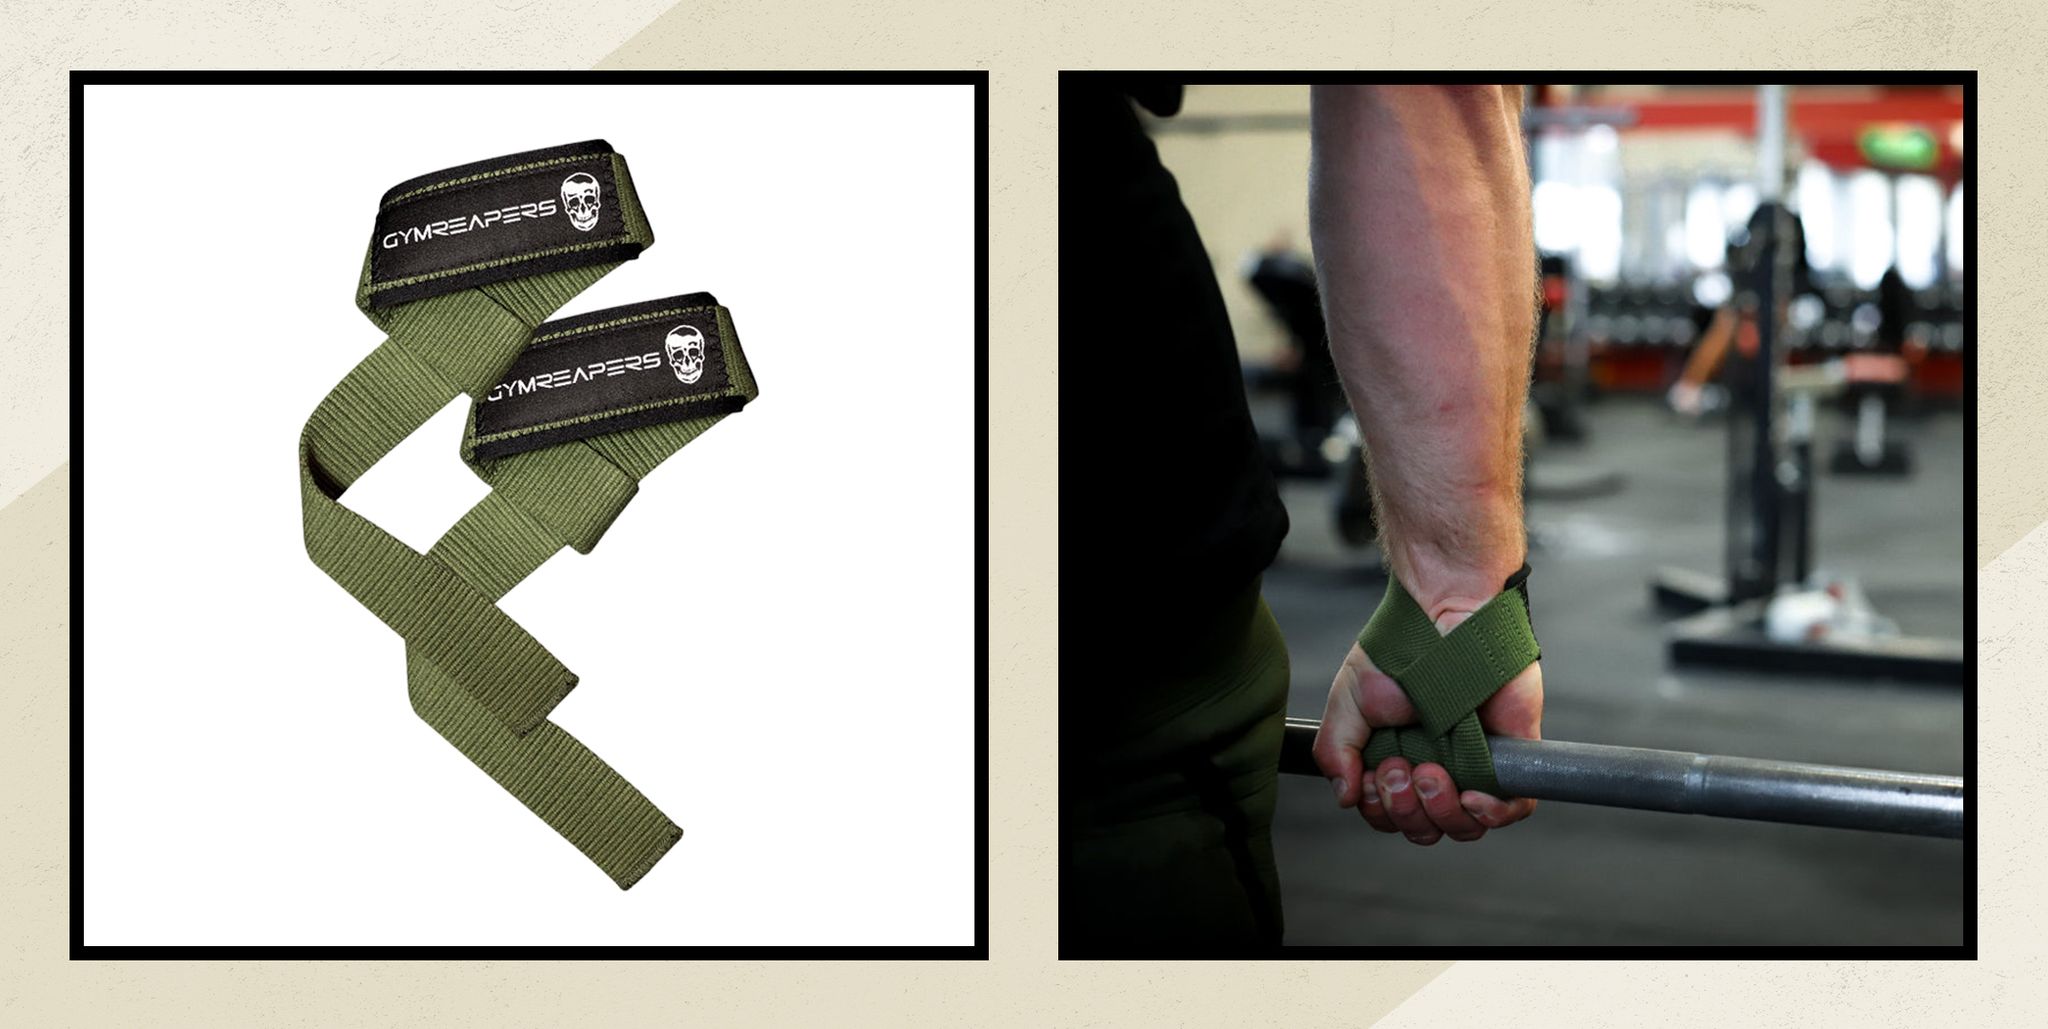 lifting Wrist Straps - Hand Wraps for Olympic Lifting, Snatch, Pulls, and  Deadlift straps. Weight lifting wrist wraps, gym accessories for women and